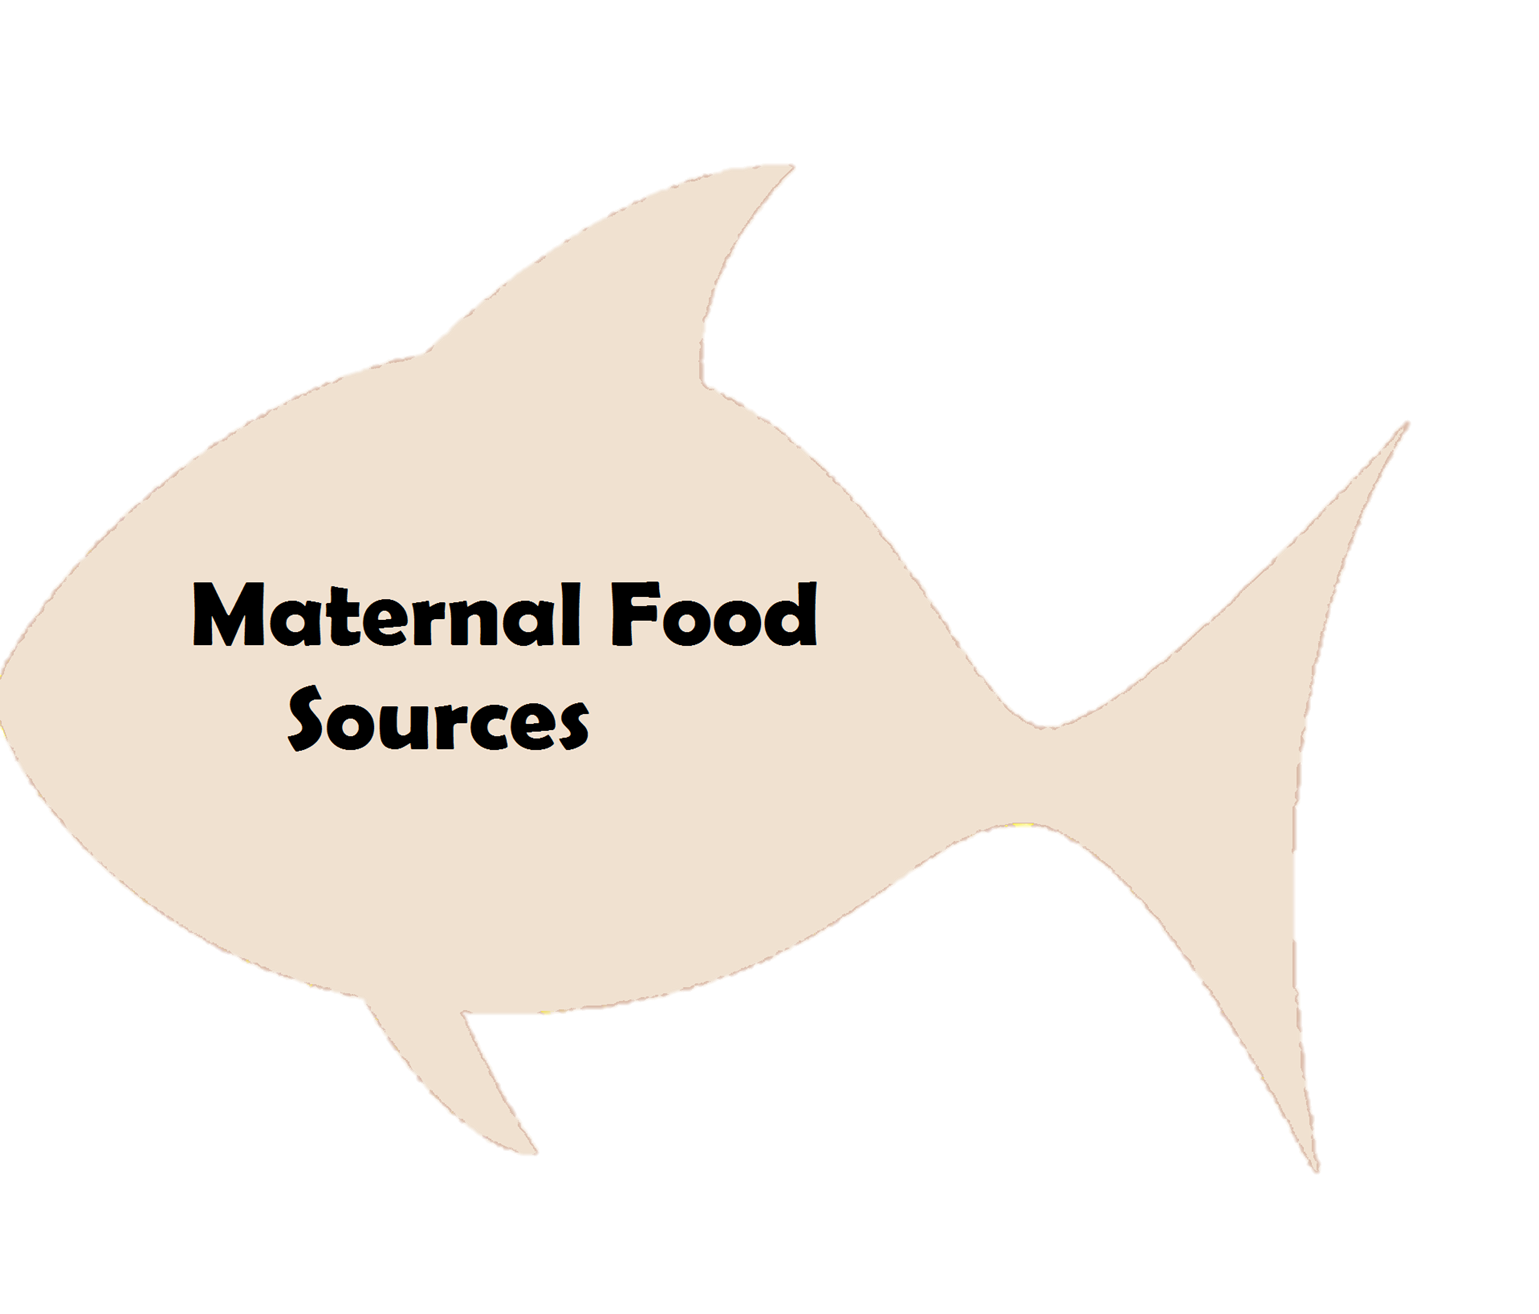 Maternal Food Sources in Bubble